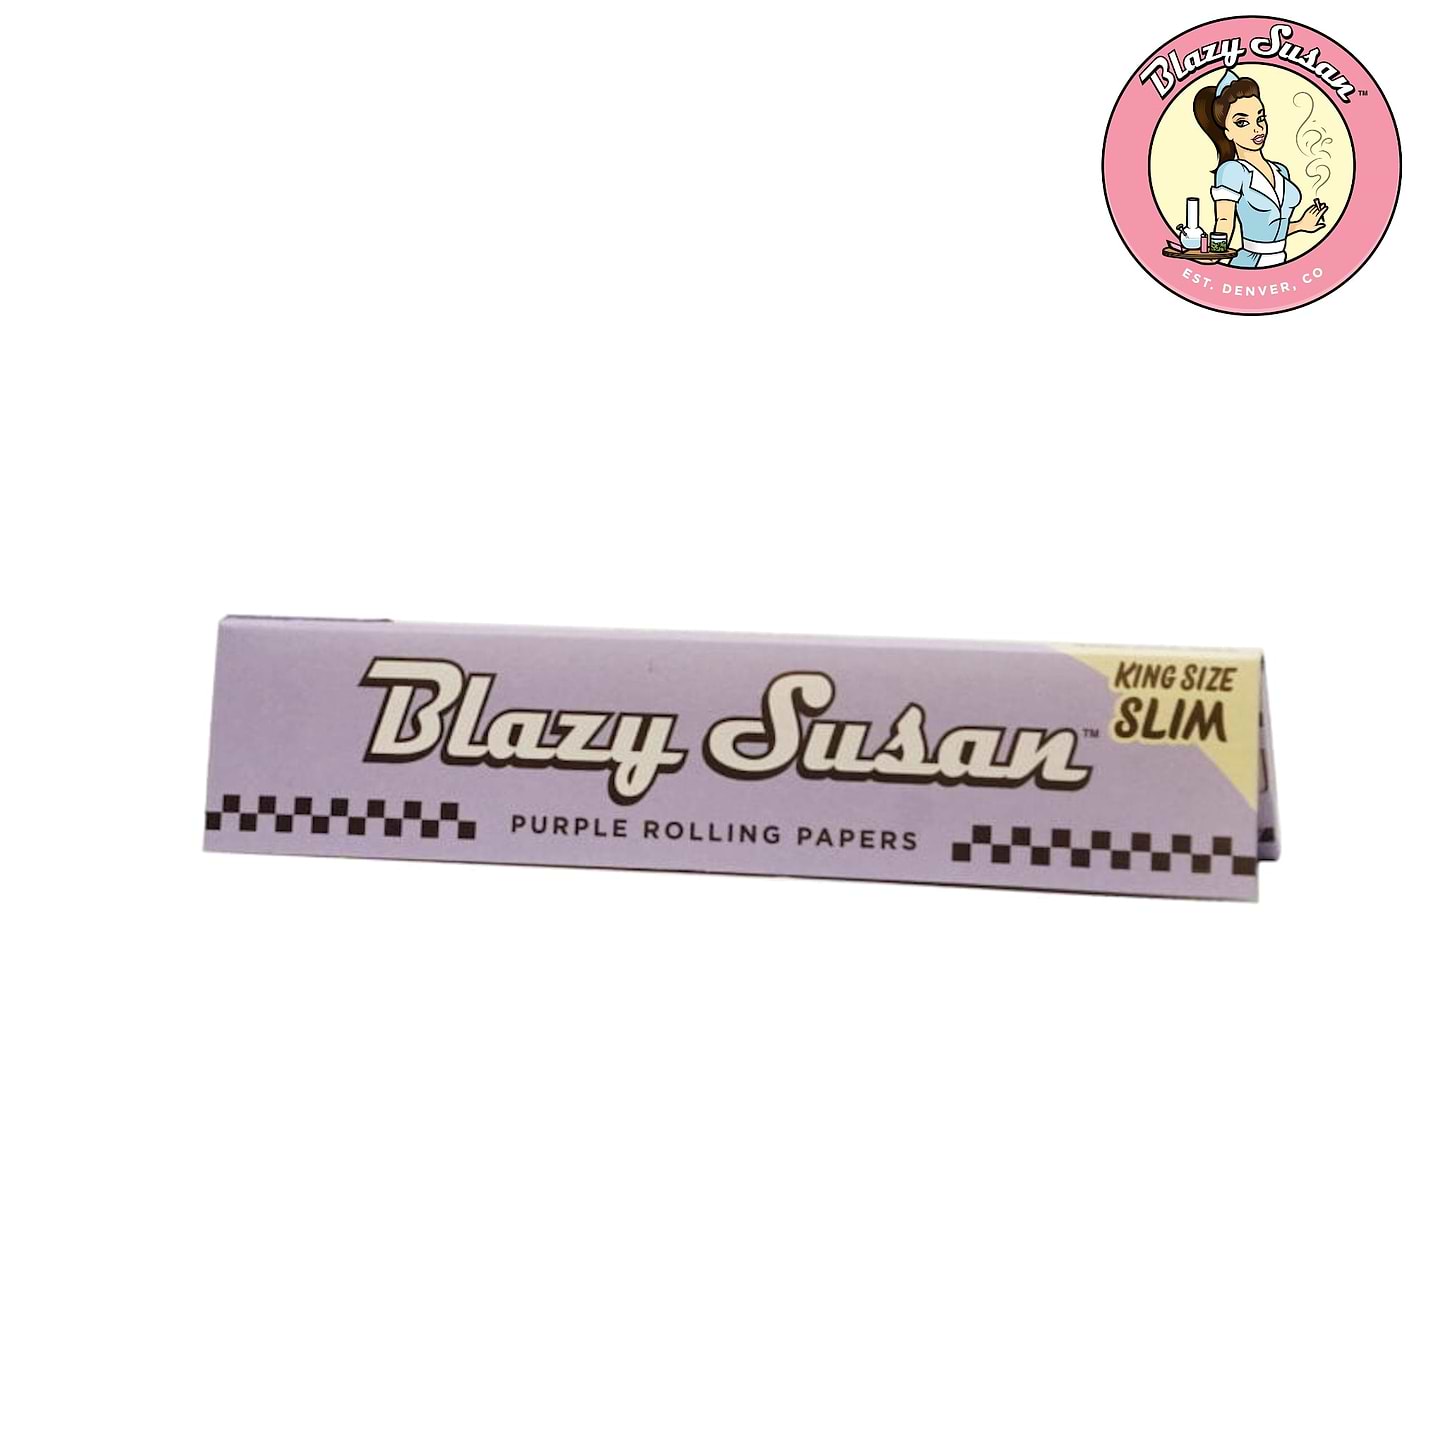 Blazy Susan Purple Rolling Papers - 2 Pack